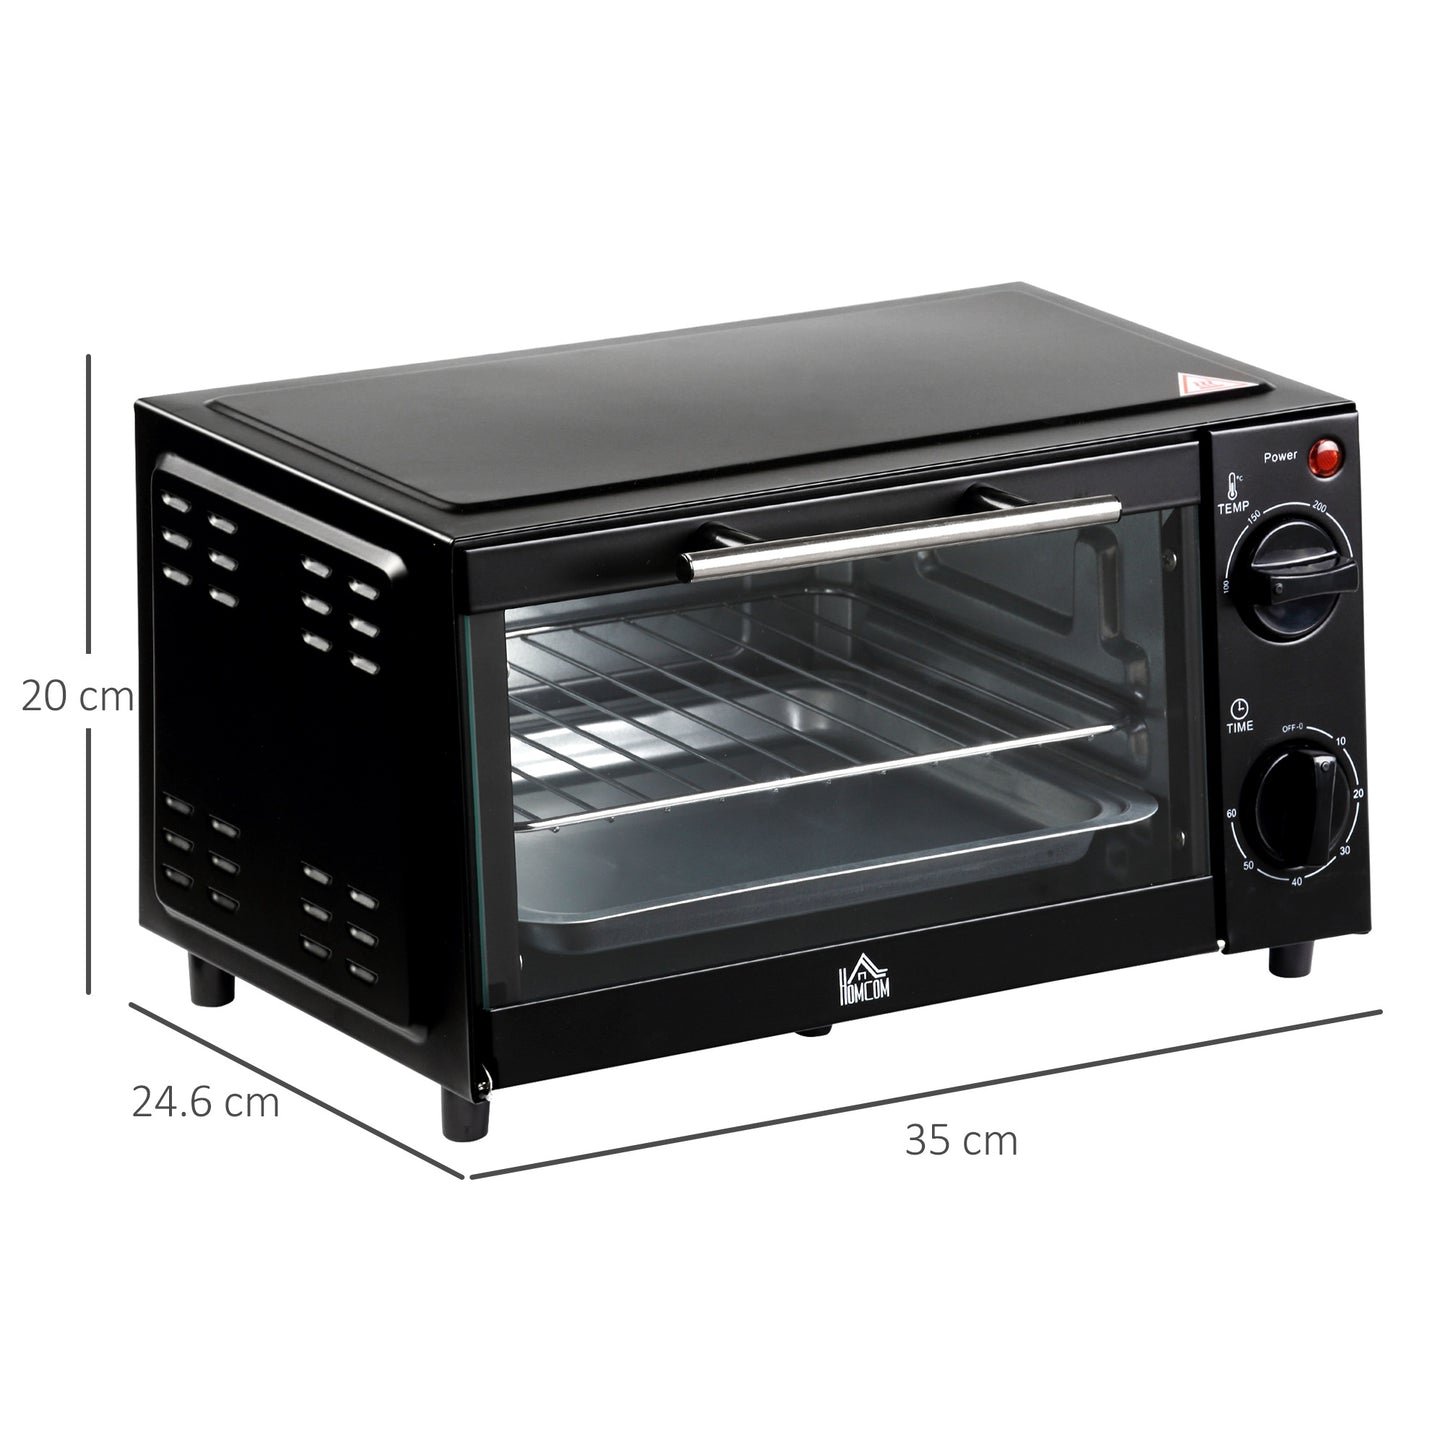 HOMCOM Convection Mini Oven, 9L Countertop Electric Grill, Toaster Oven with Adjustable Temperature, Timer, Baking Tray and Wire Rack, 750W